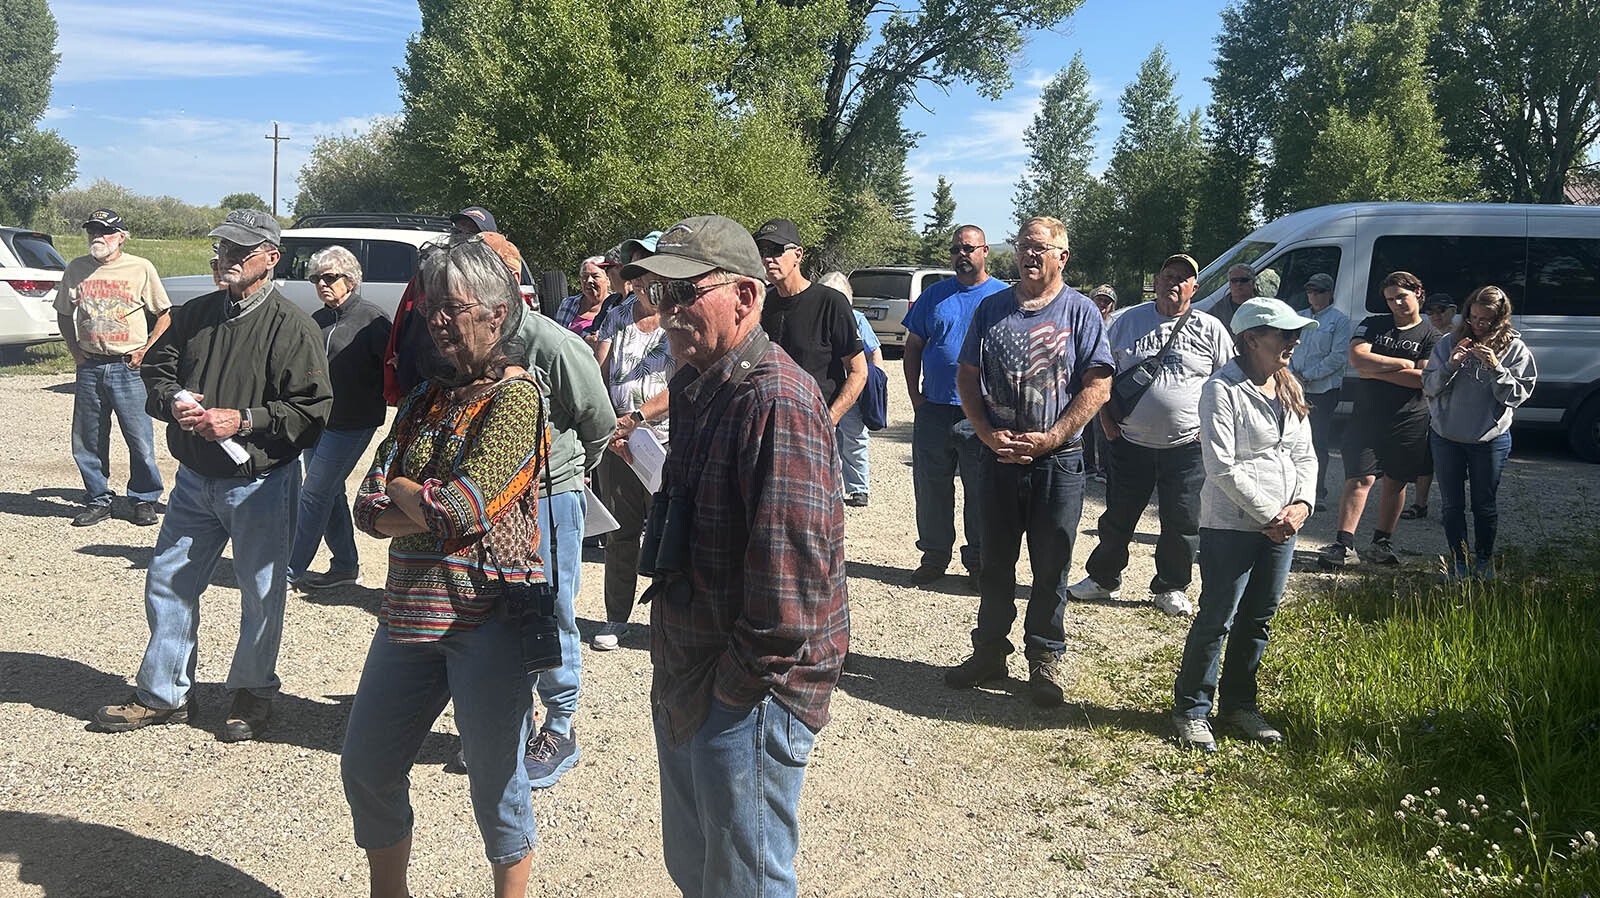 About 50 people from as far away as Florida attended an auto tour of rendezvous sites in Sublette County on July 6.